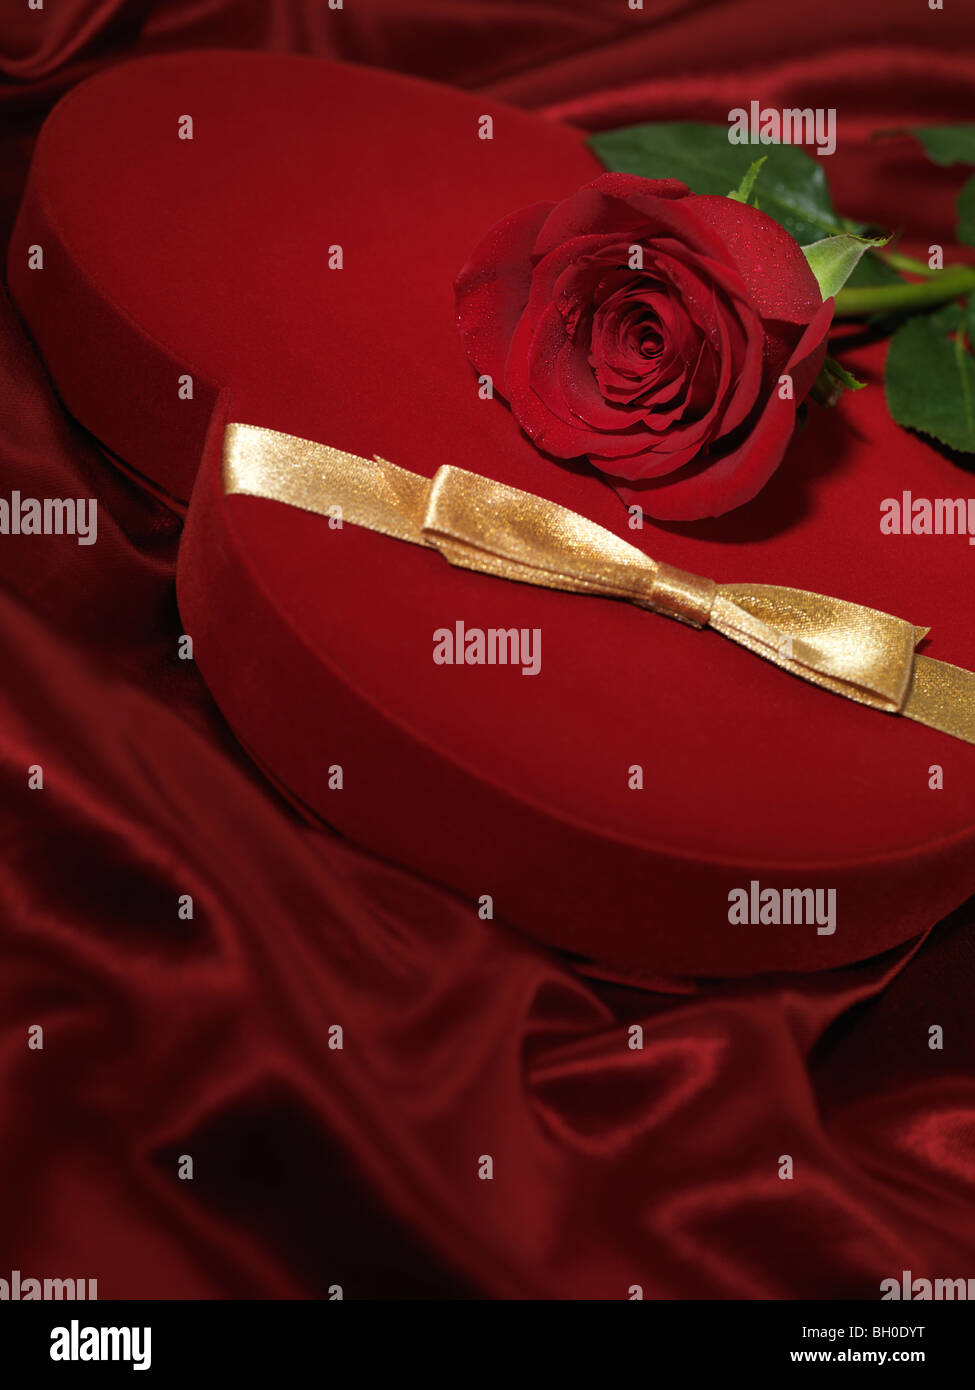 Red heart-shaped gift box and a red rose on red silky cloth Stock Photo